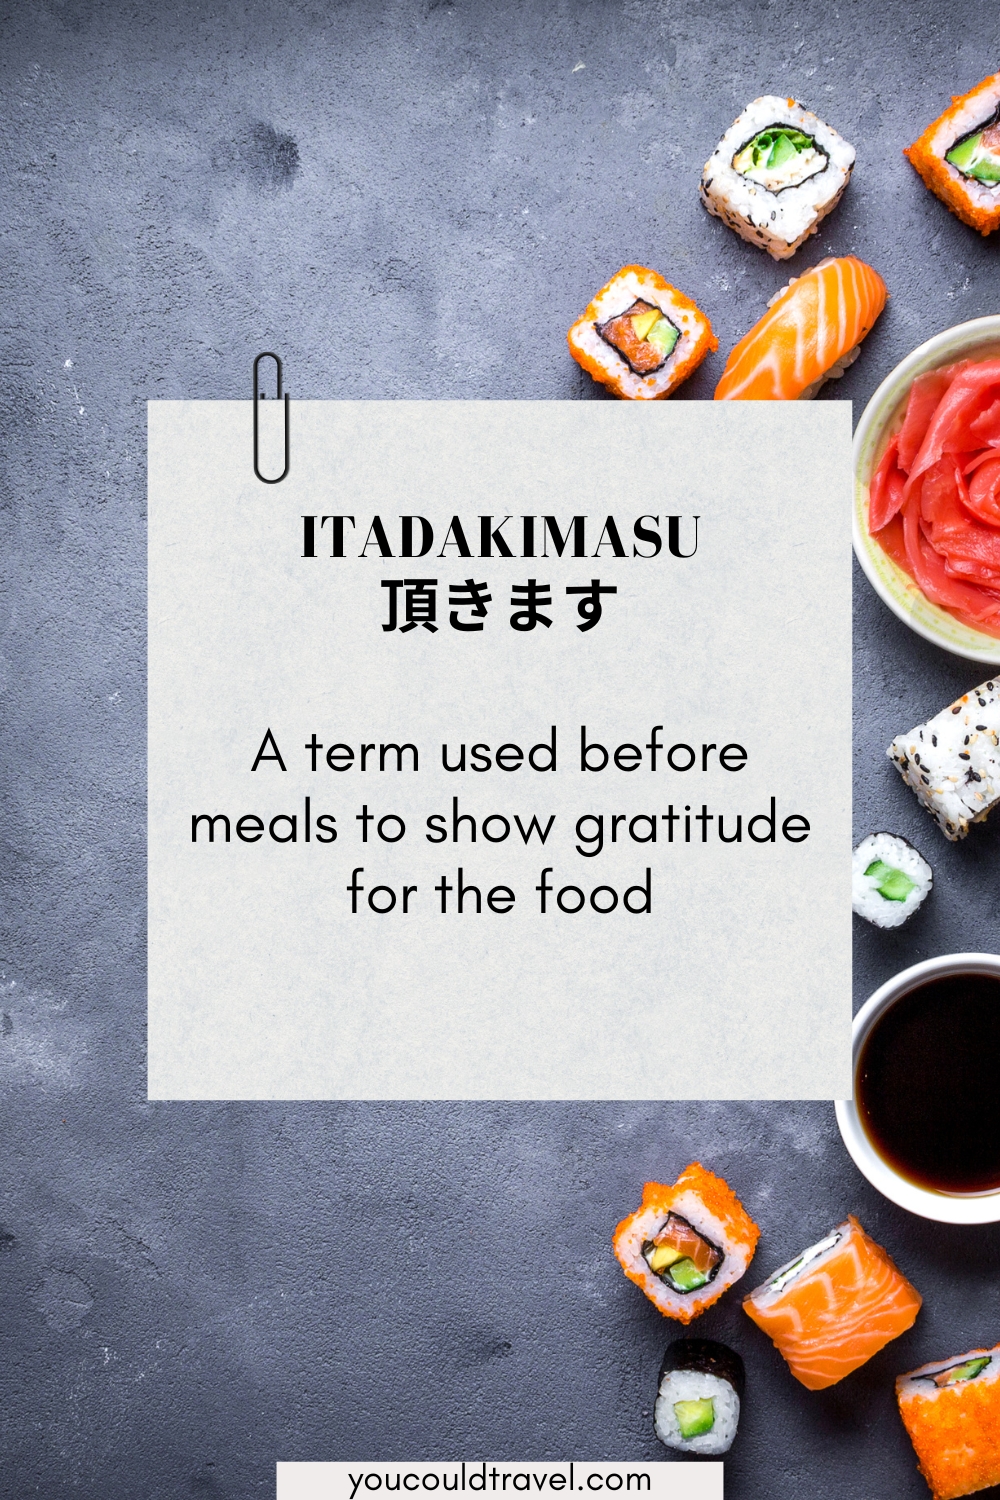 Itadakimasu - the Japanese word for thanking for the meal before once eats